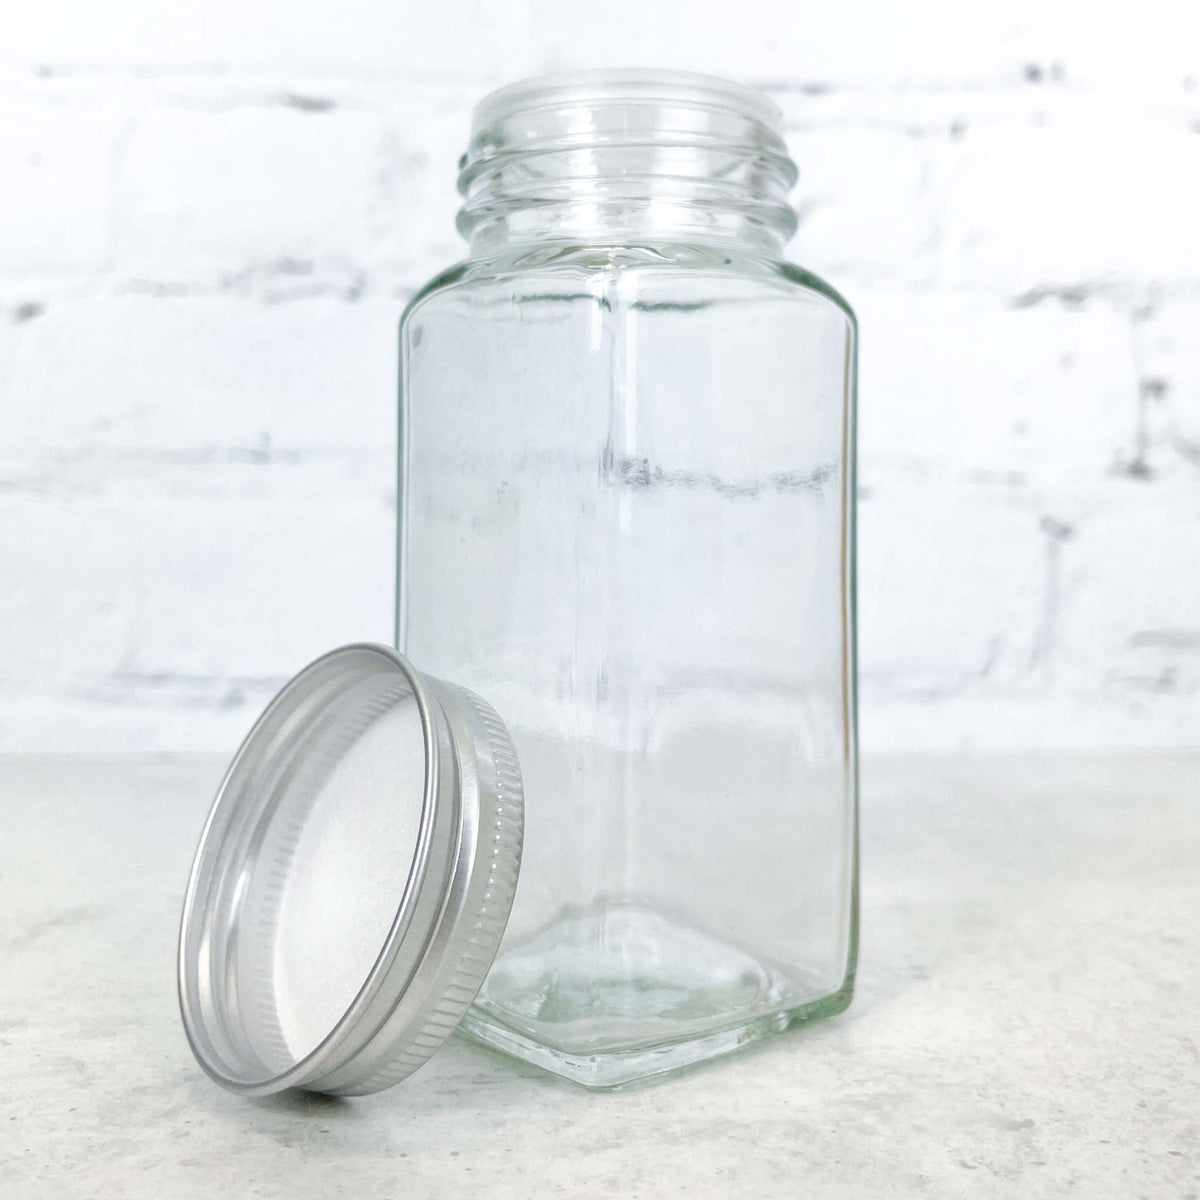 120 Shaker Spice Jars with Silver Lid